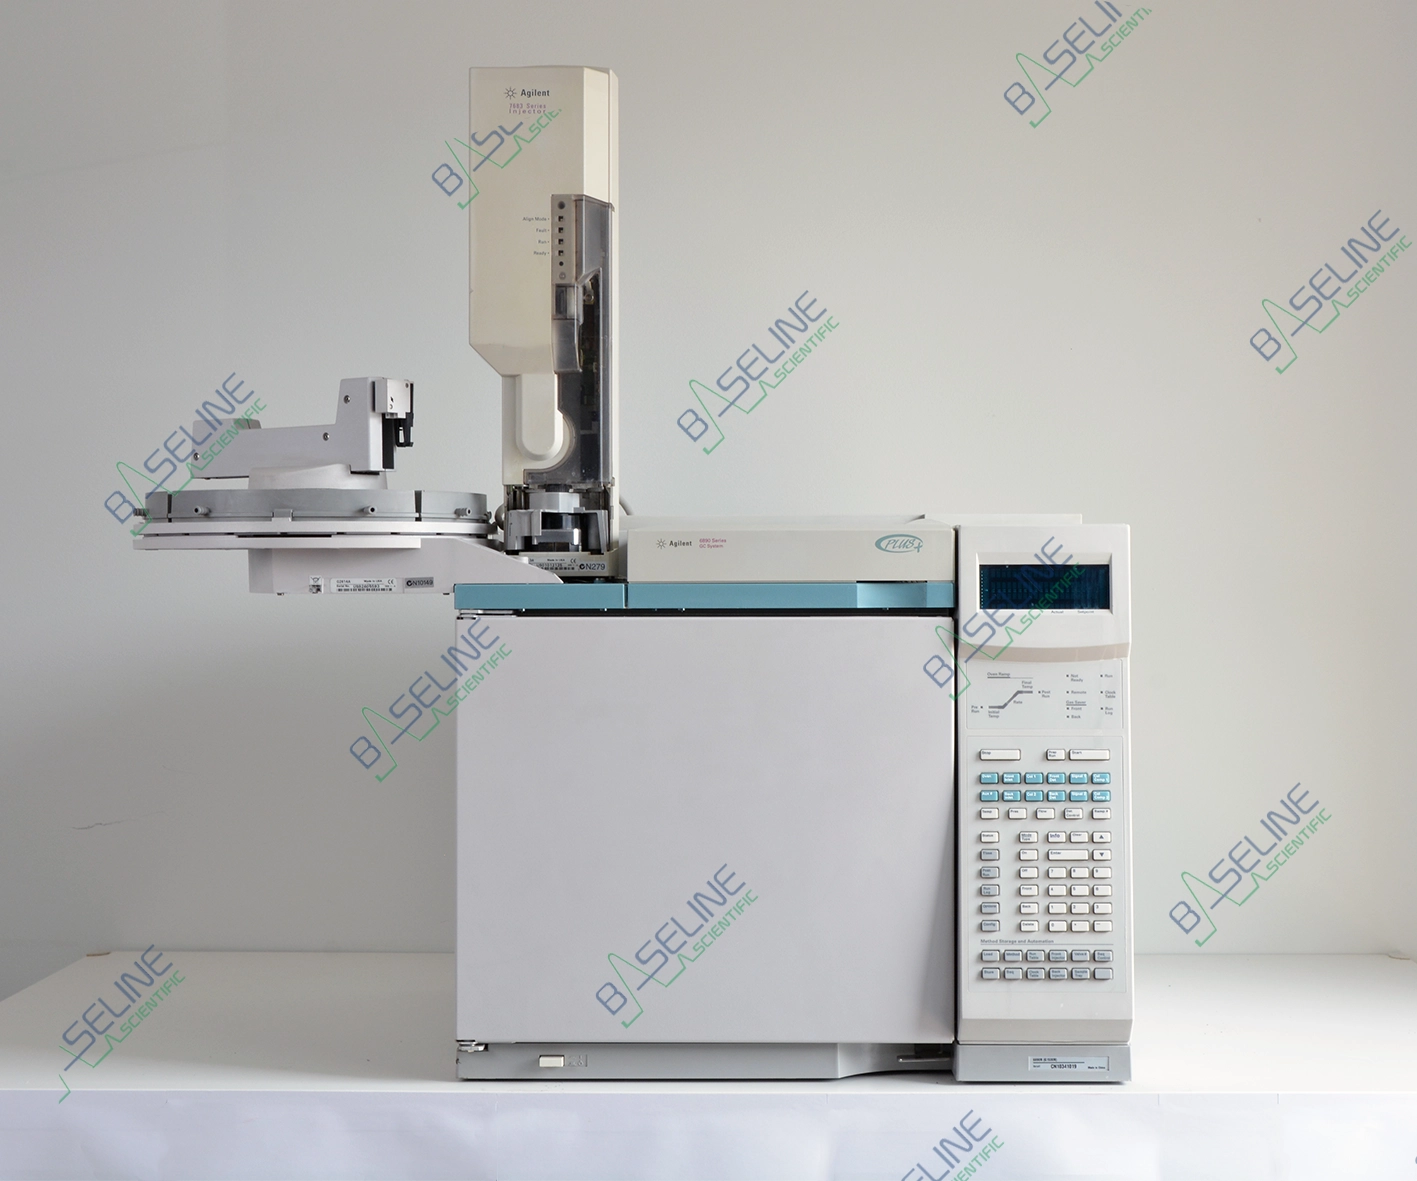 Refurbished Agilent 6890 GC with PP SSL TCD FID and 7683 Series Autosampler Two Injection Tower